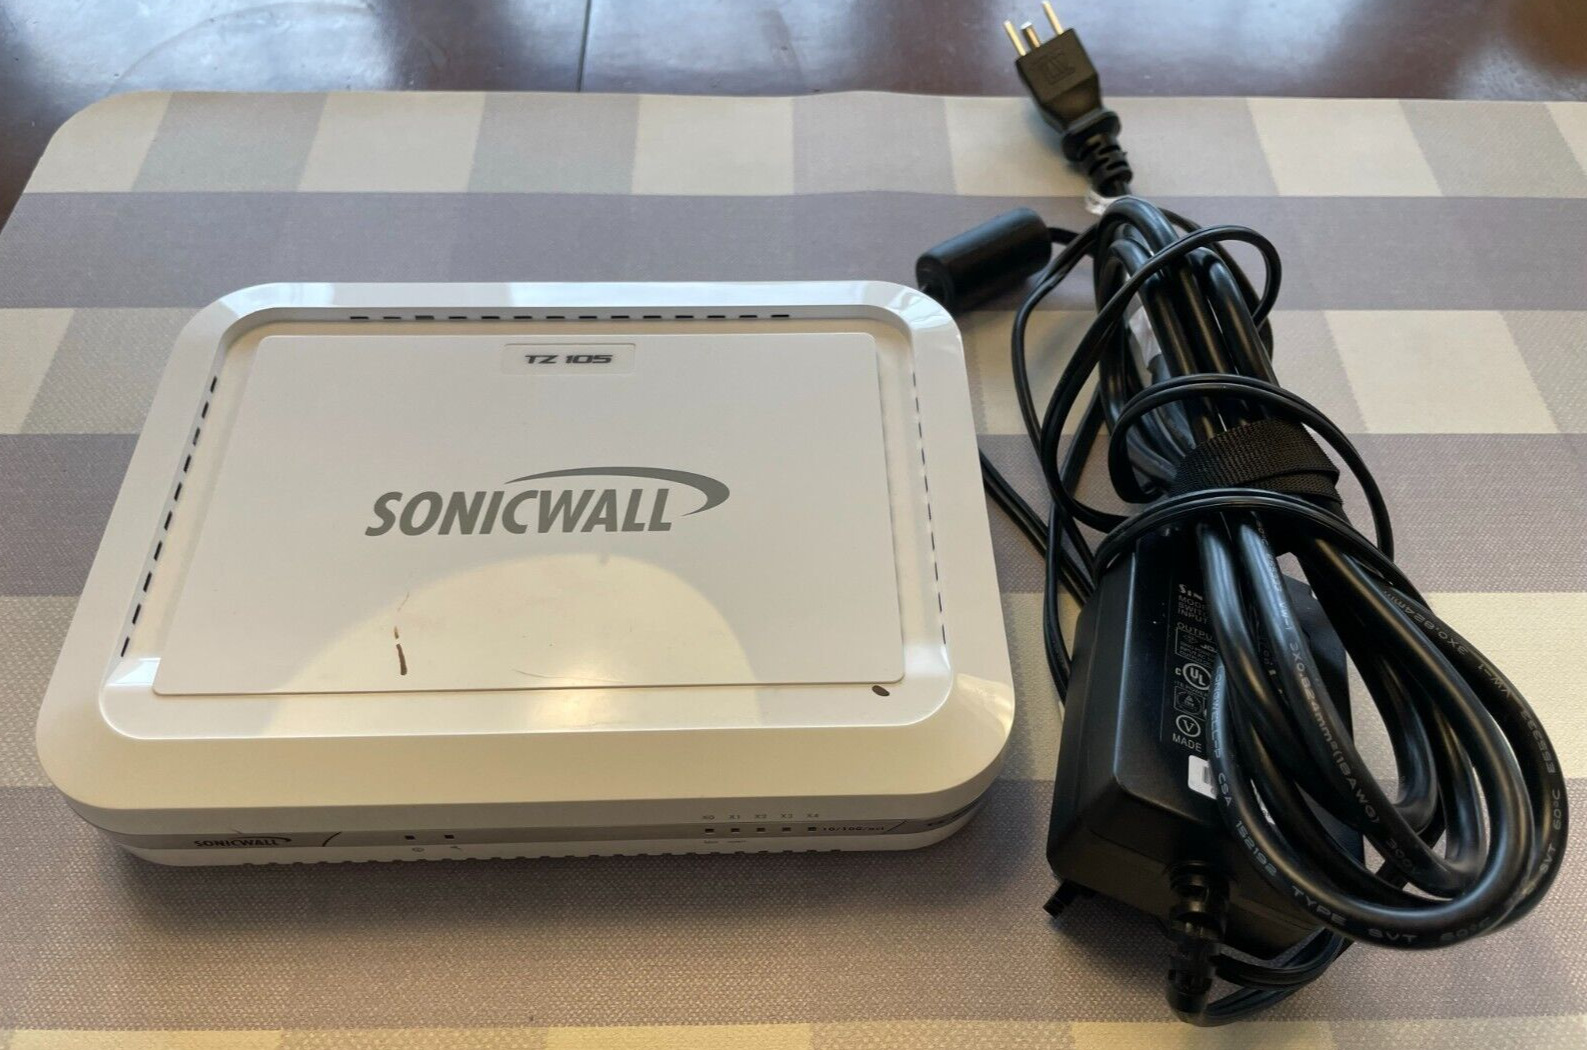 SonicWall TZ105 (APL22-09B) Firewall - Ready to Transfer/Register - Working